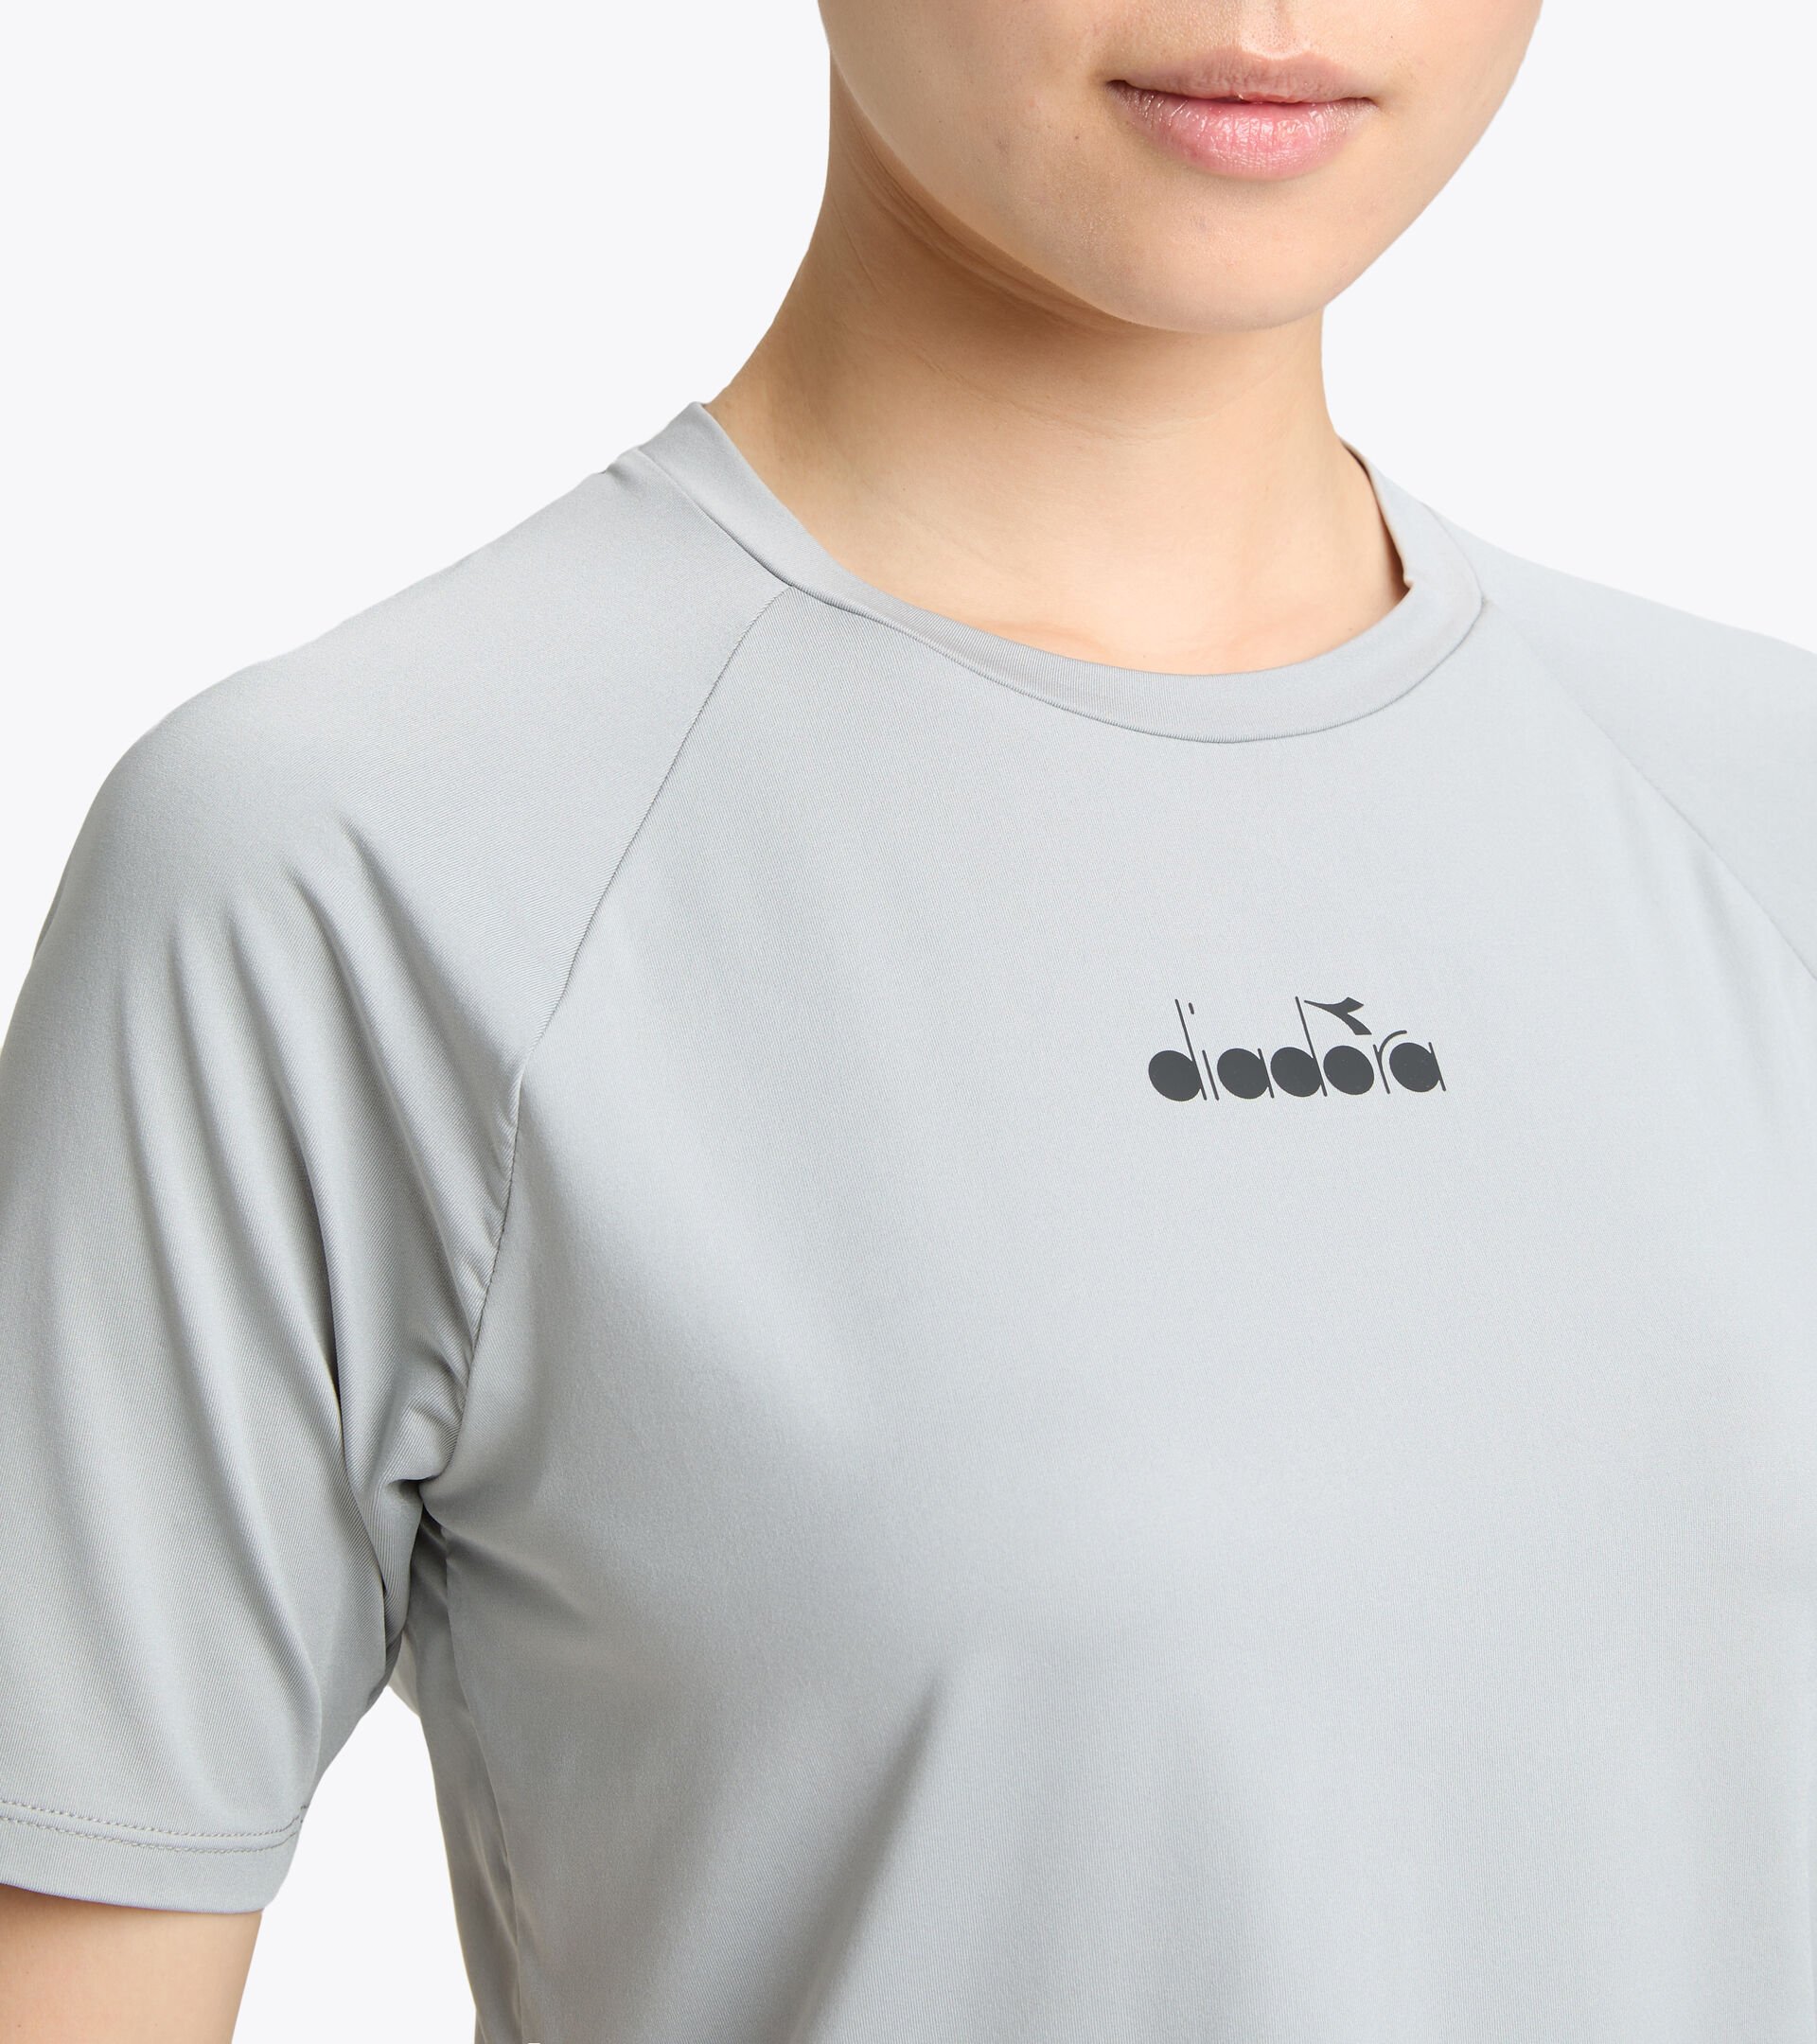 Training top - Women’s L. CROP TOP BE ONE FT SILVER METALIZED - Diadora